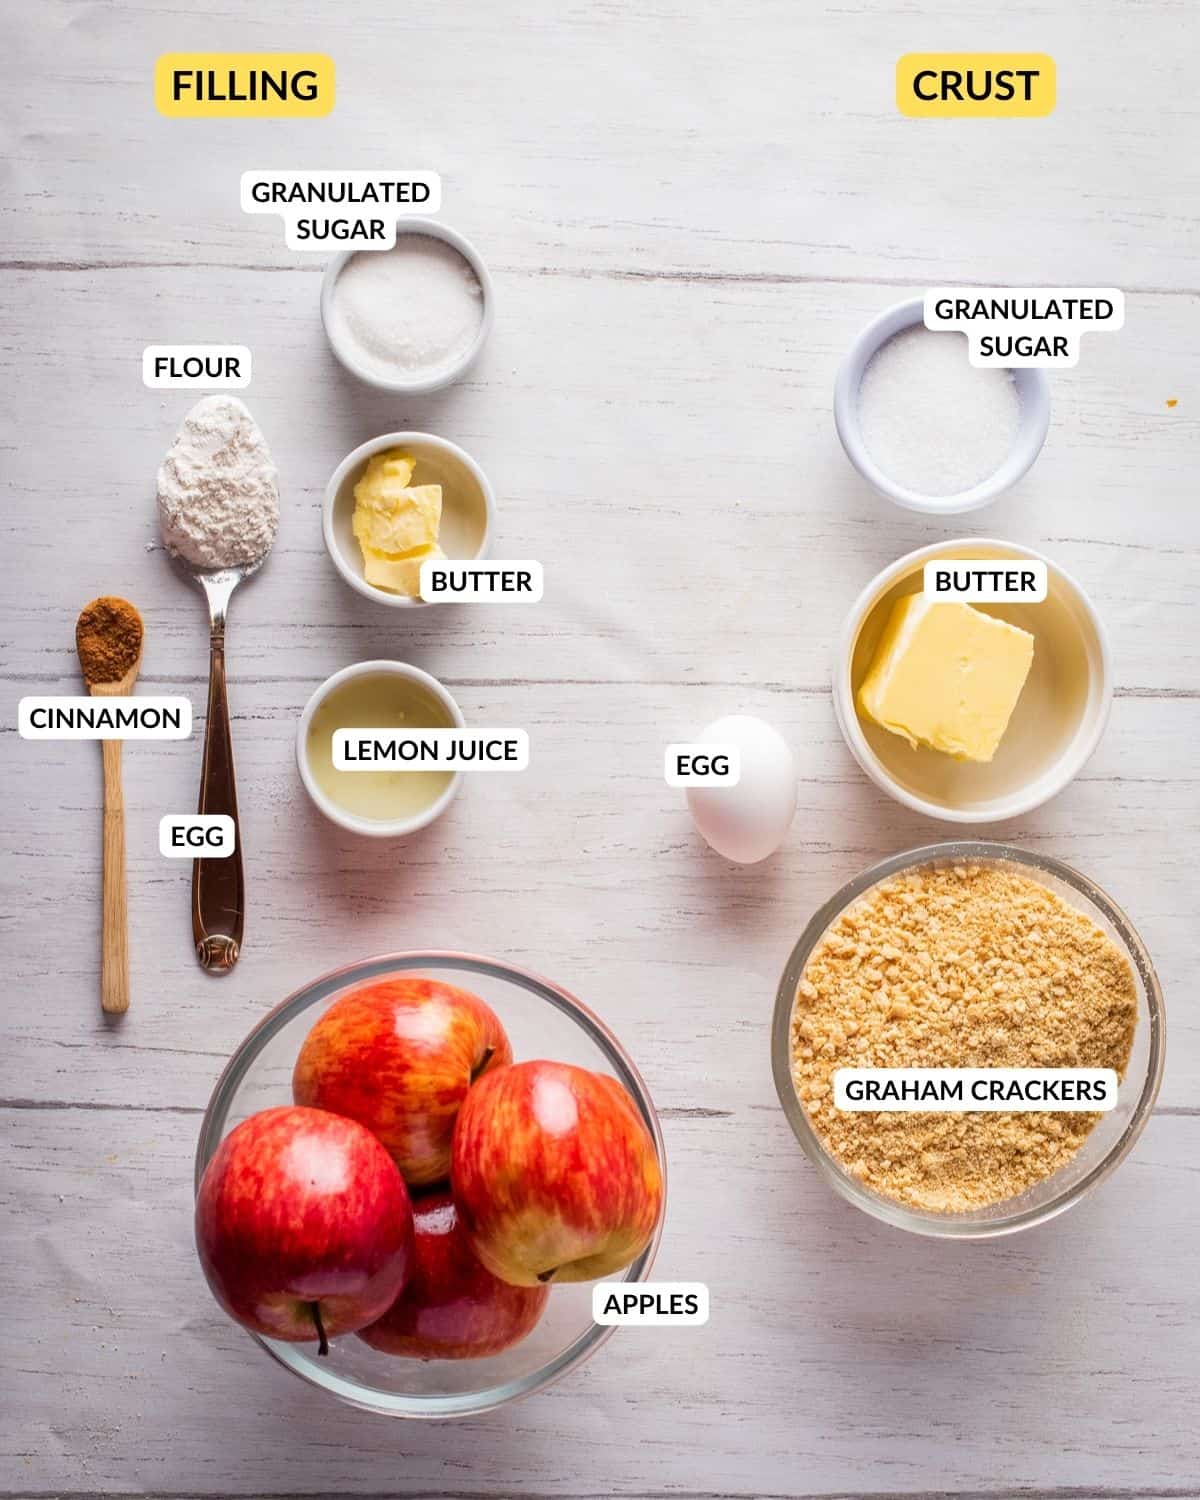 Labeled ingredient list for making the apple pie and Graham cracker crust.